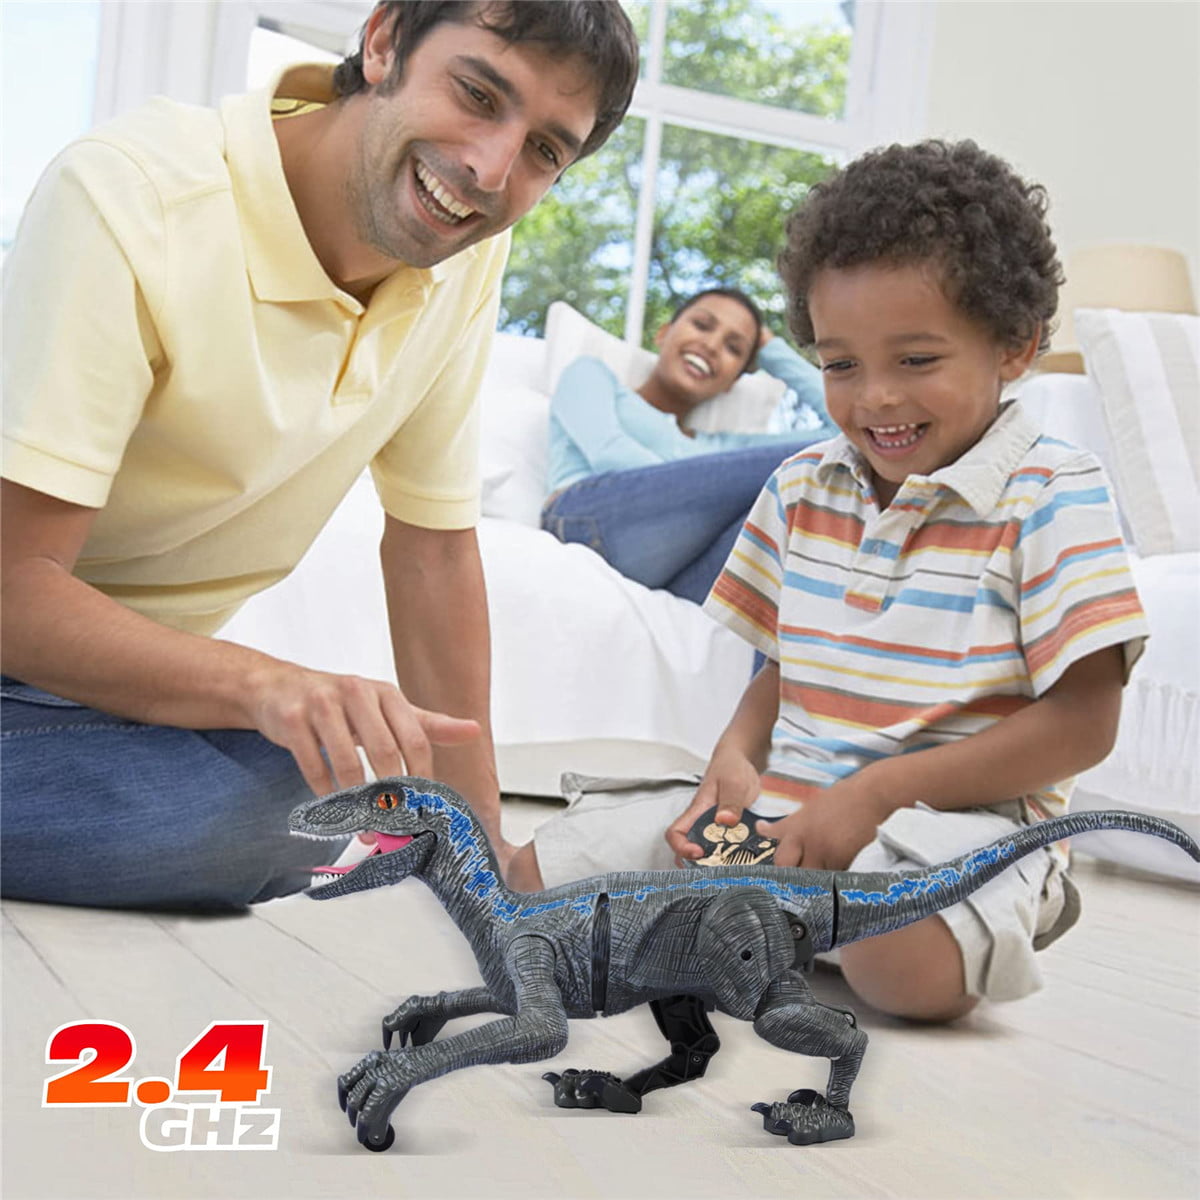 Remote Control Dinosaur for Kids Boys Girls,2.4G Electronic RC Toys Educational Simulation Velociraptor with 3D Eye Shaking Head&Roaring Sounds,Indoor Toys for 3 4 5 6 7 8 9 10 Year Old Gifts Yellow 